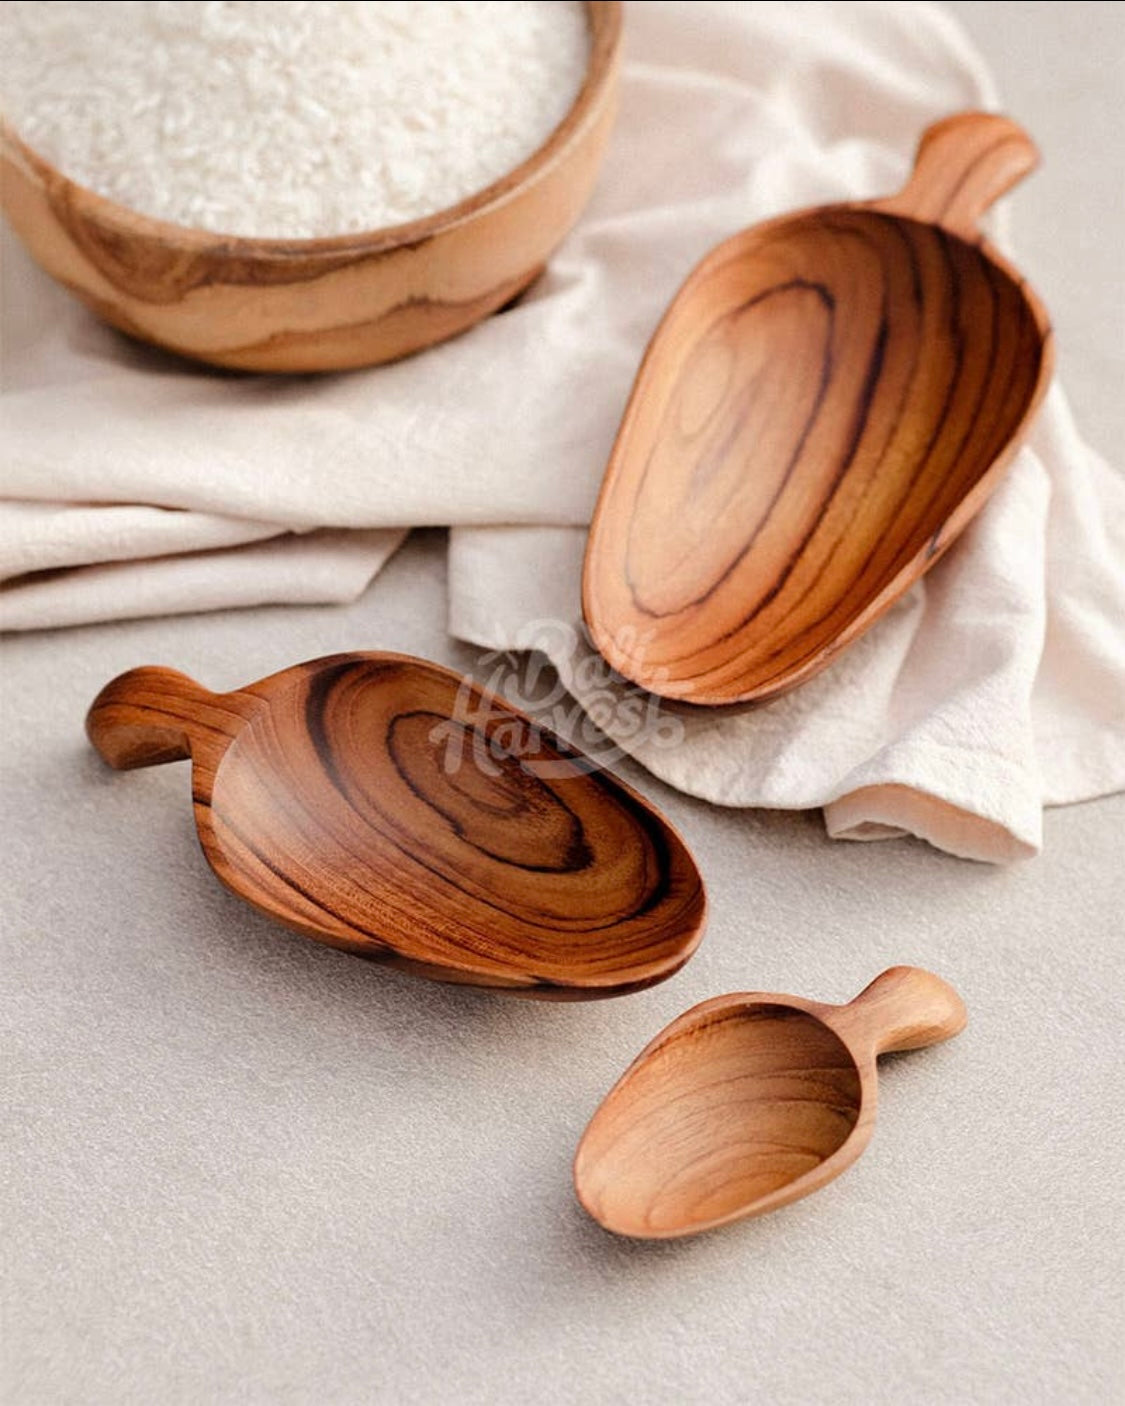 Teak Wooden Scoops and Spoons